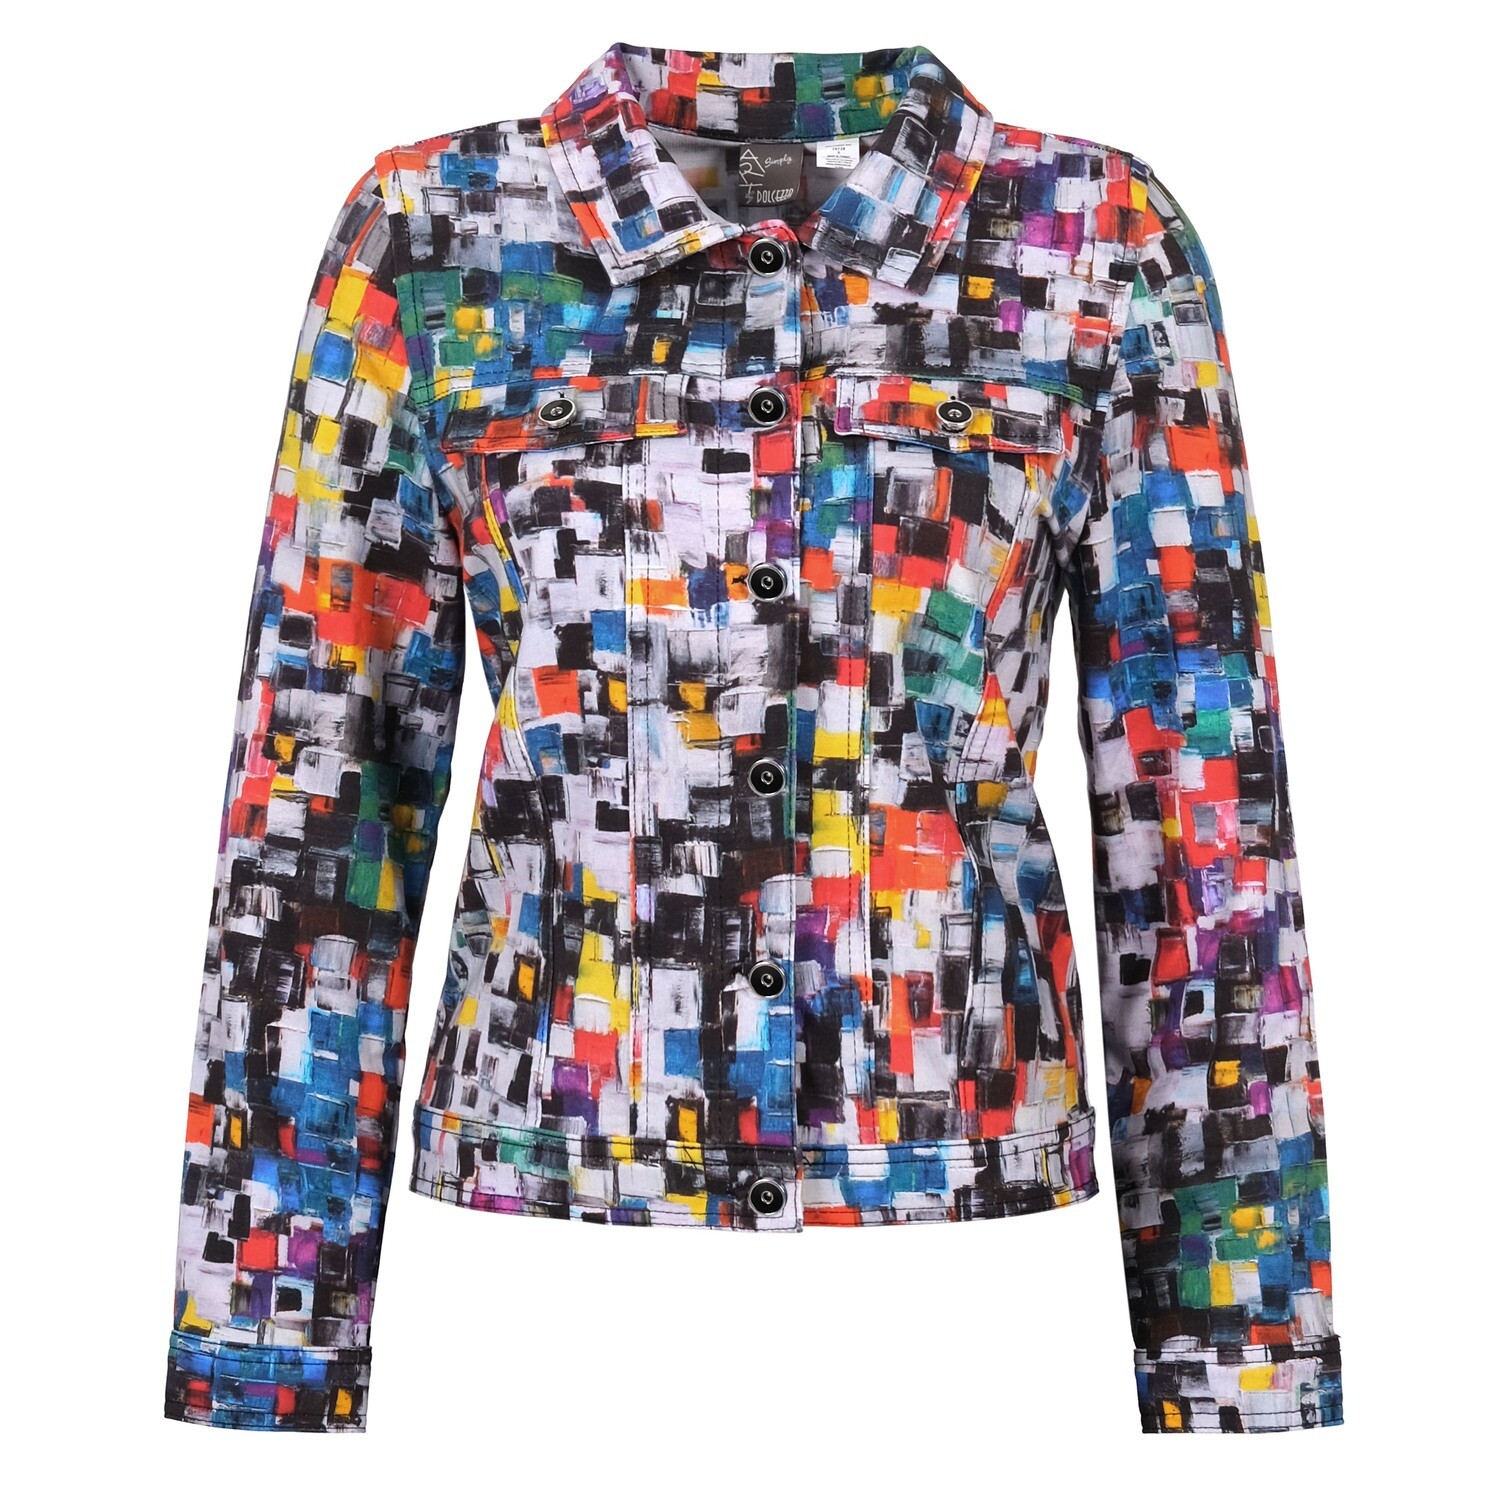 Simply Art Dolcezza: Heads Up In Color Abstract art Denim Jacket